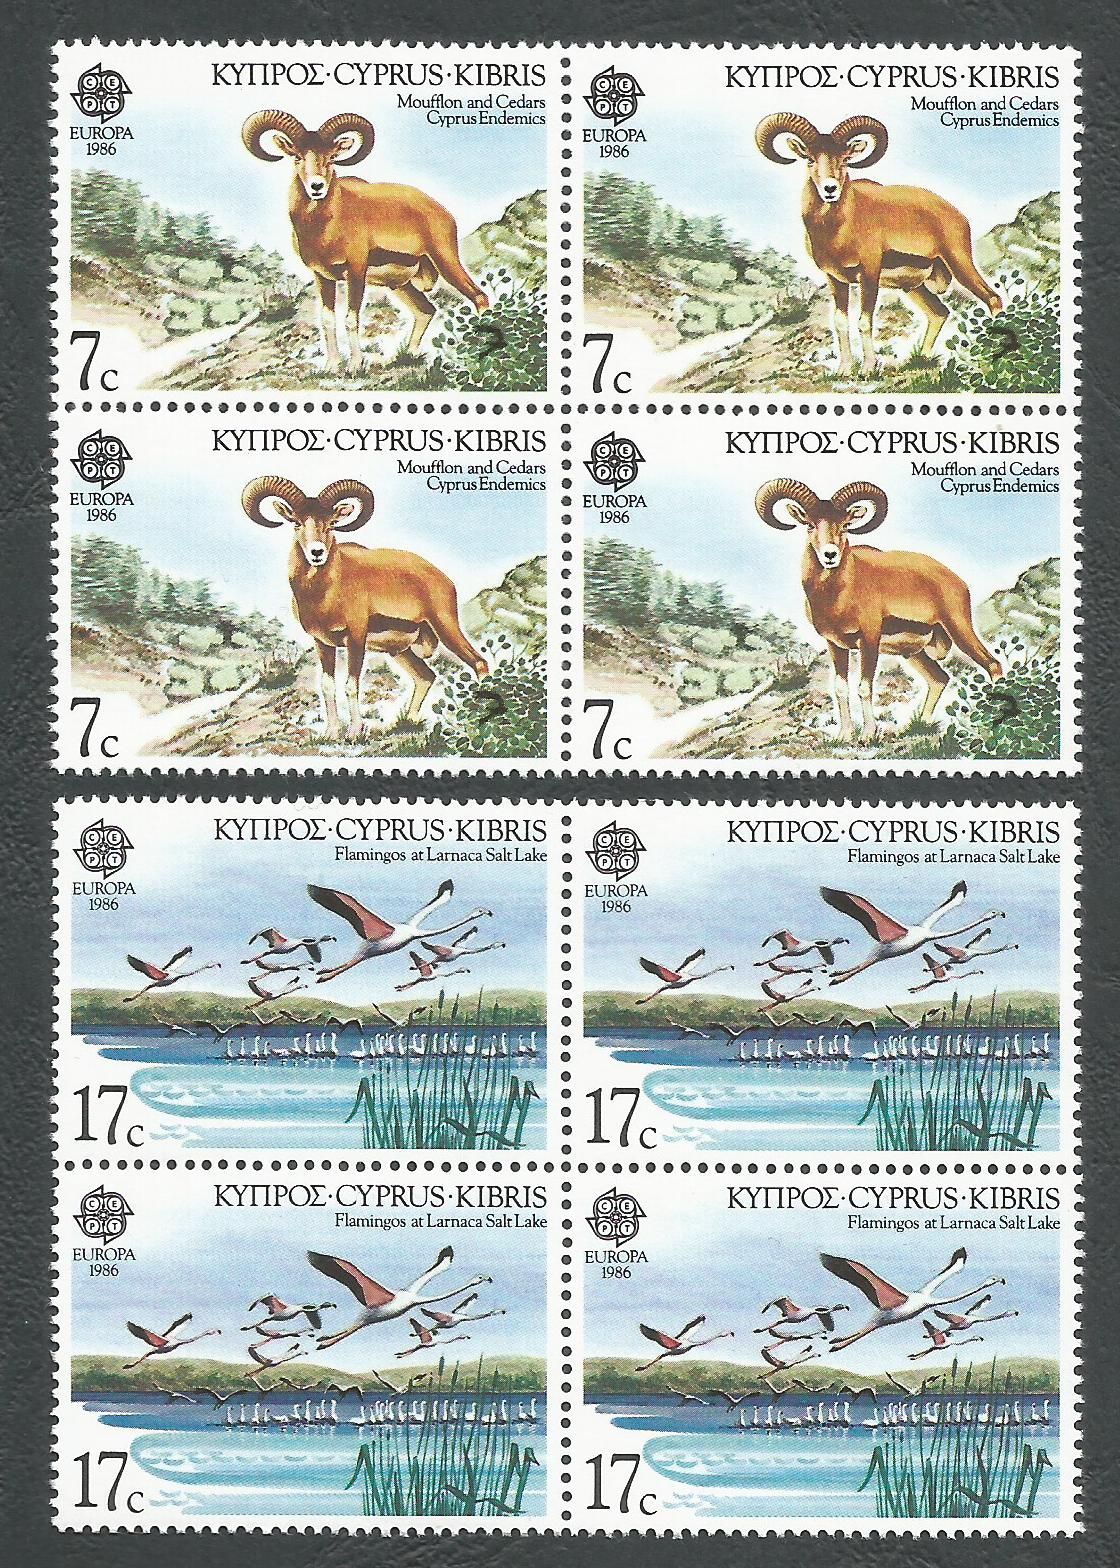 Cyprus Stamps SG 678-79 1986 Europa Nature Conservation - Block of 4 MINT 